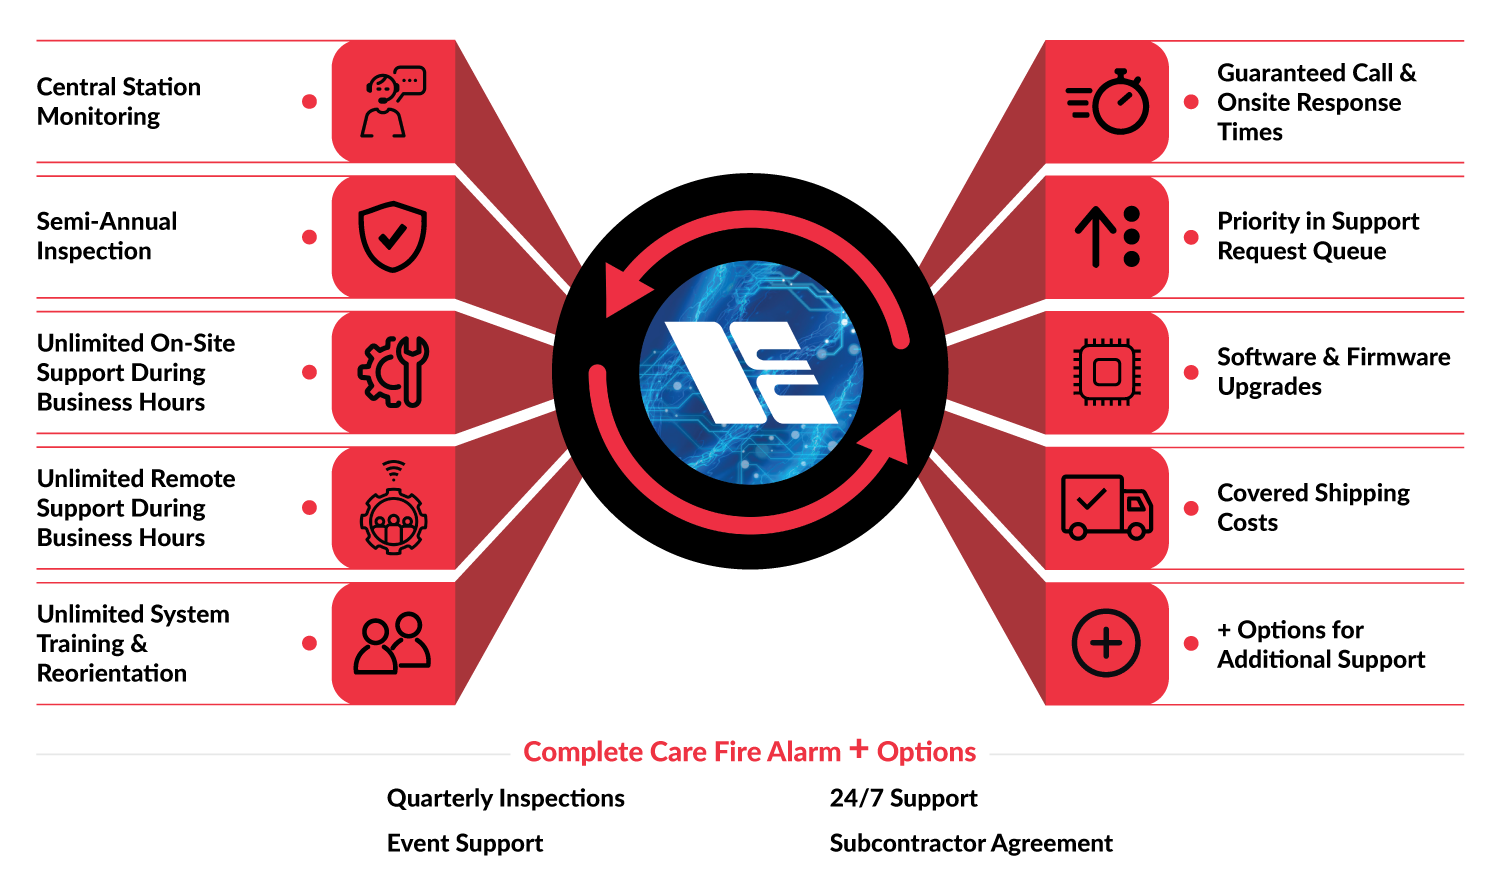 Complete Care Fire Alarm Overview